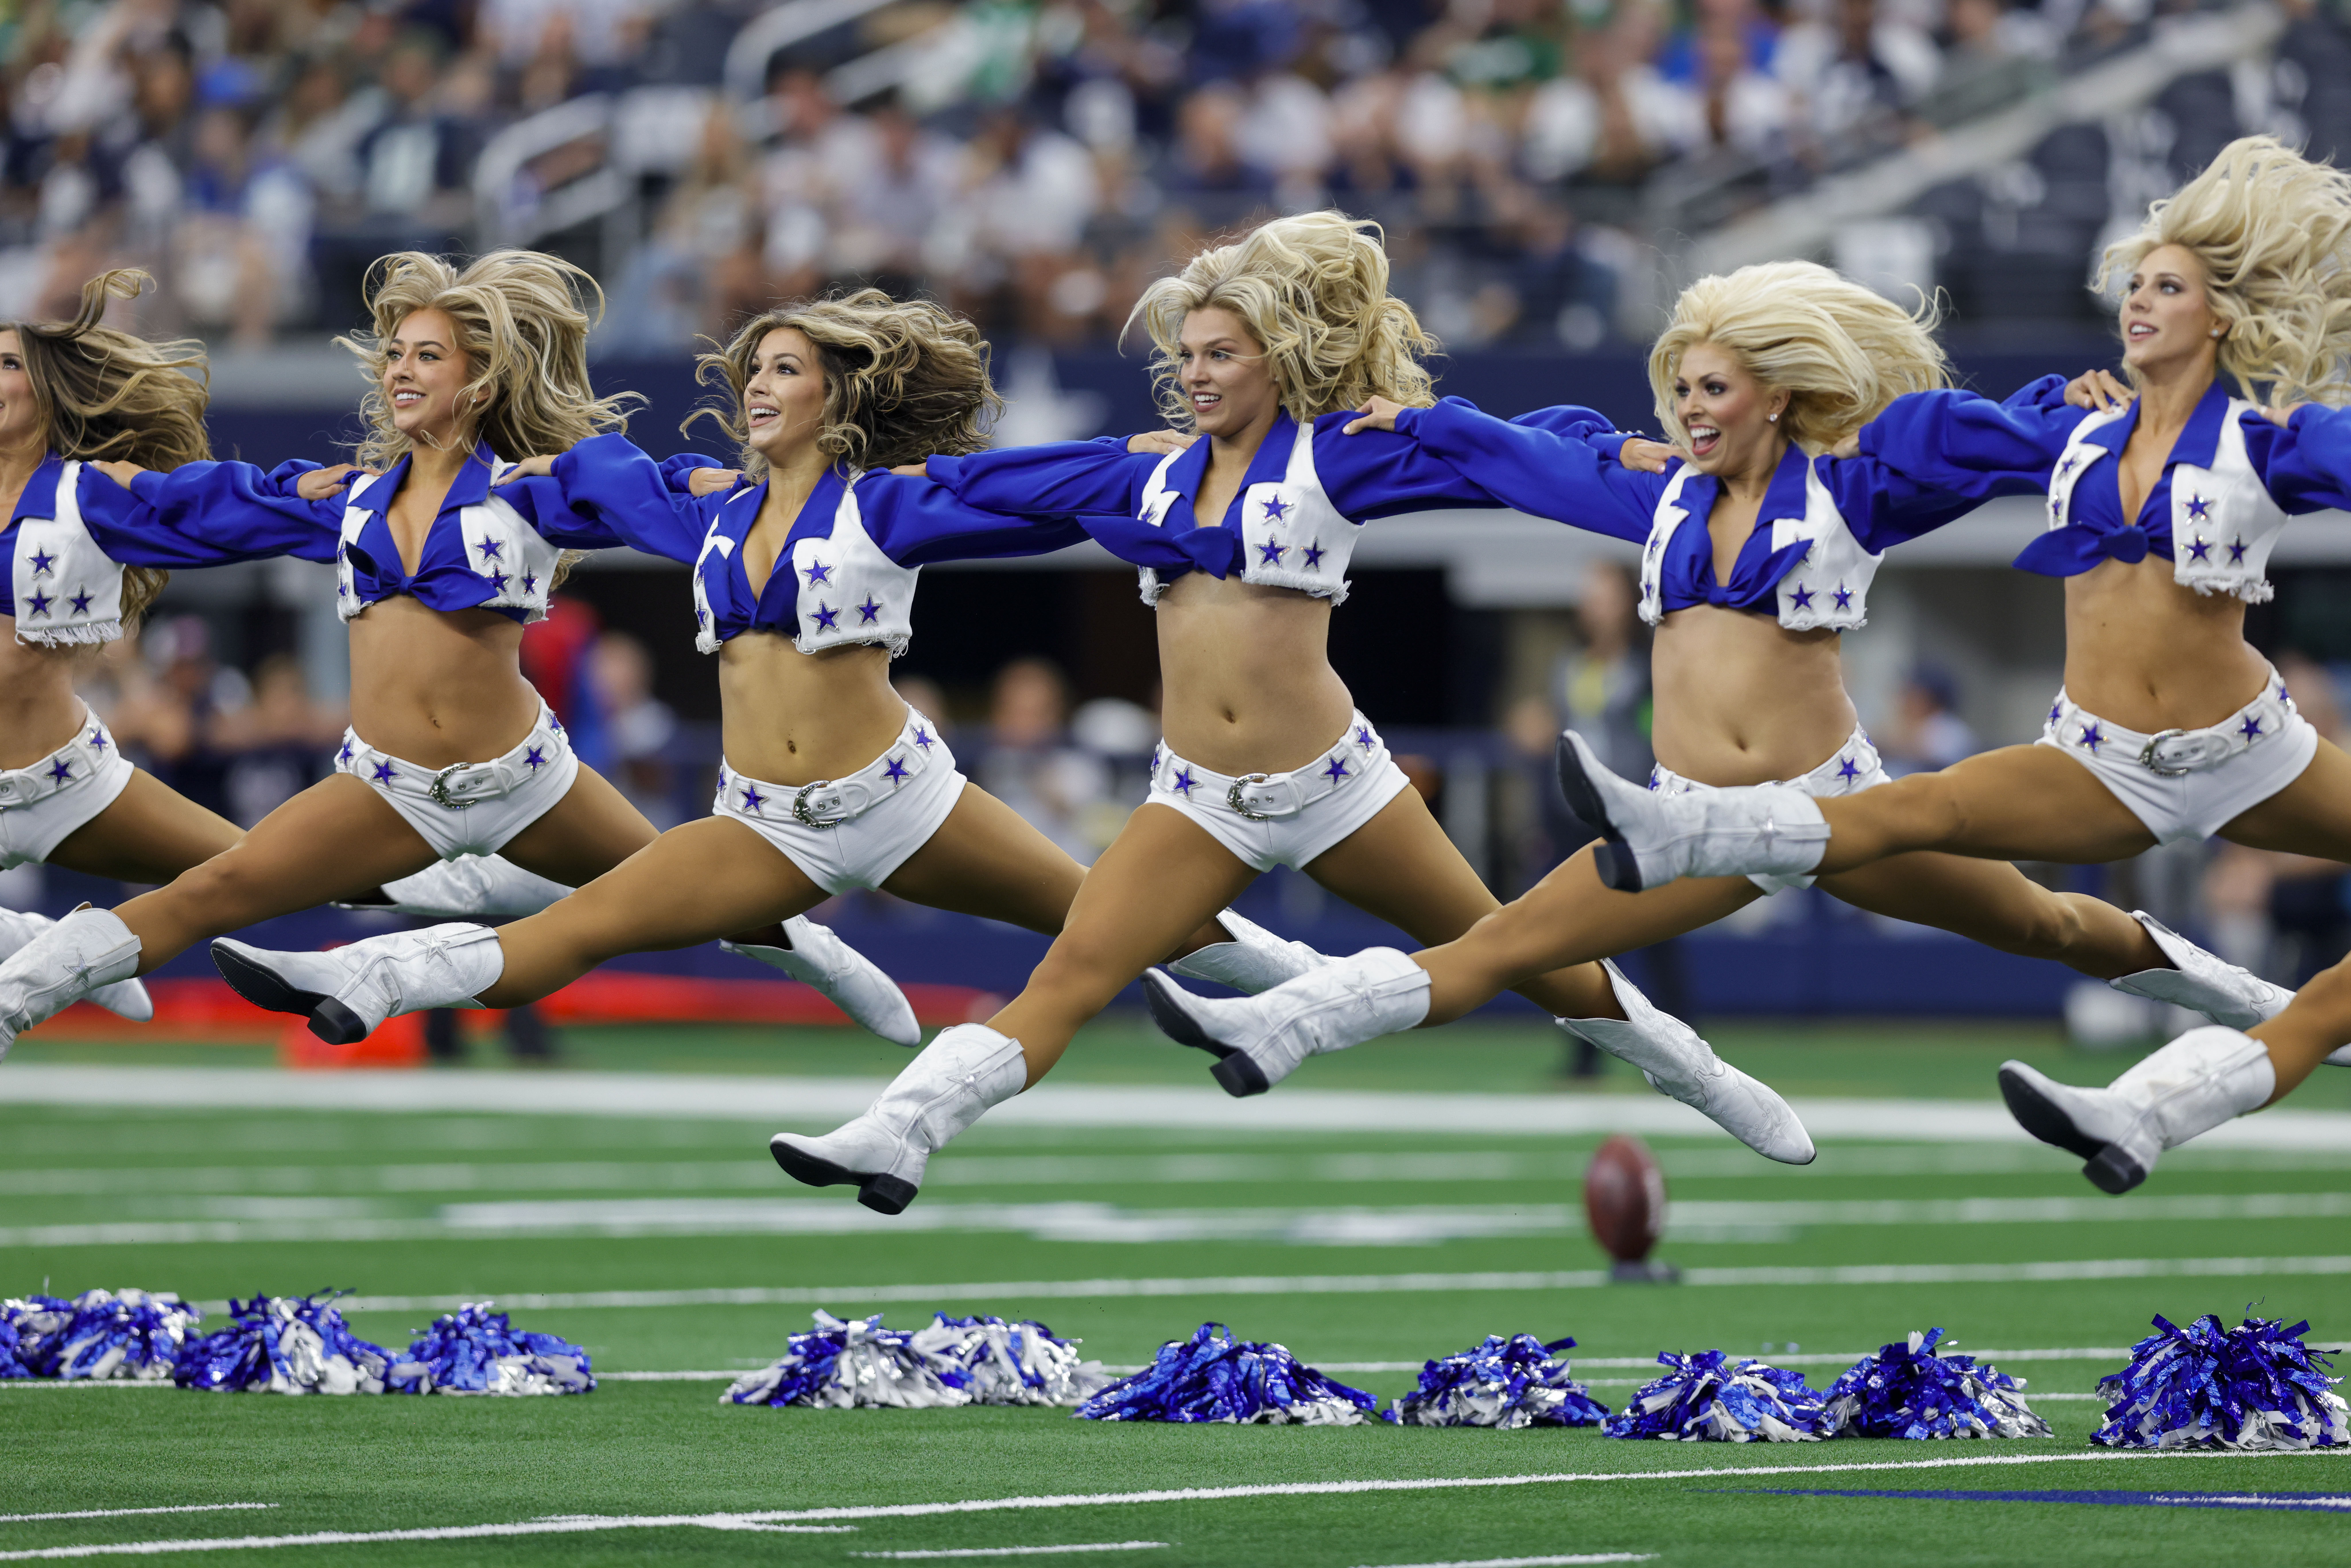 dominic wainwright recommends dallas cowboys cheerleaders sex pic